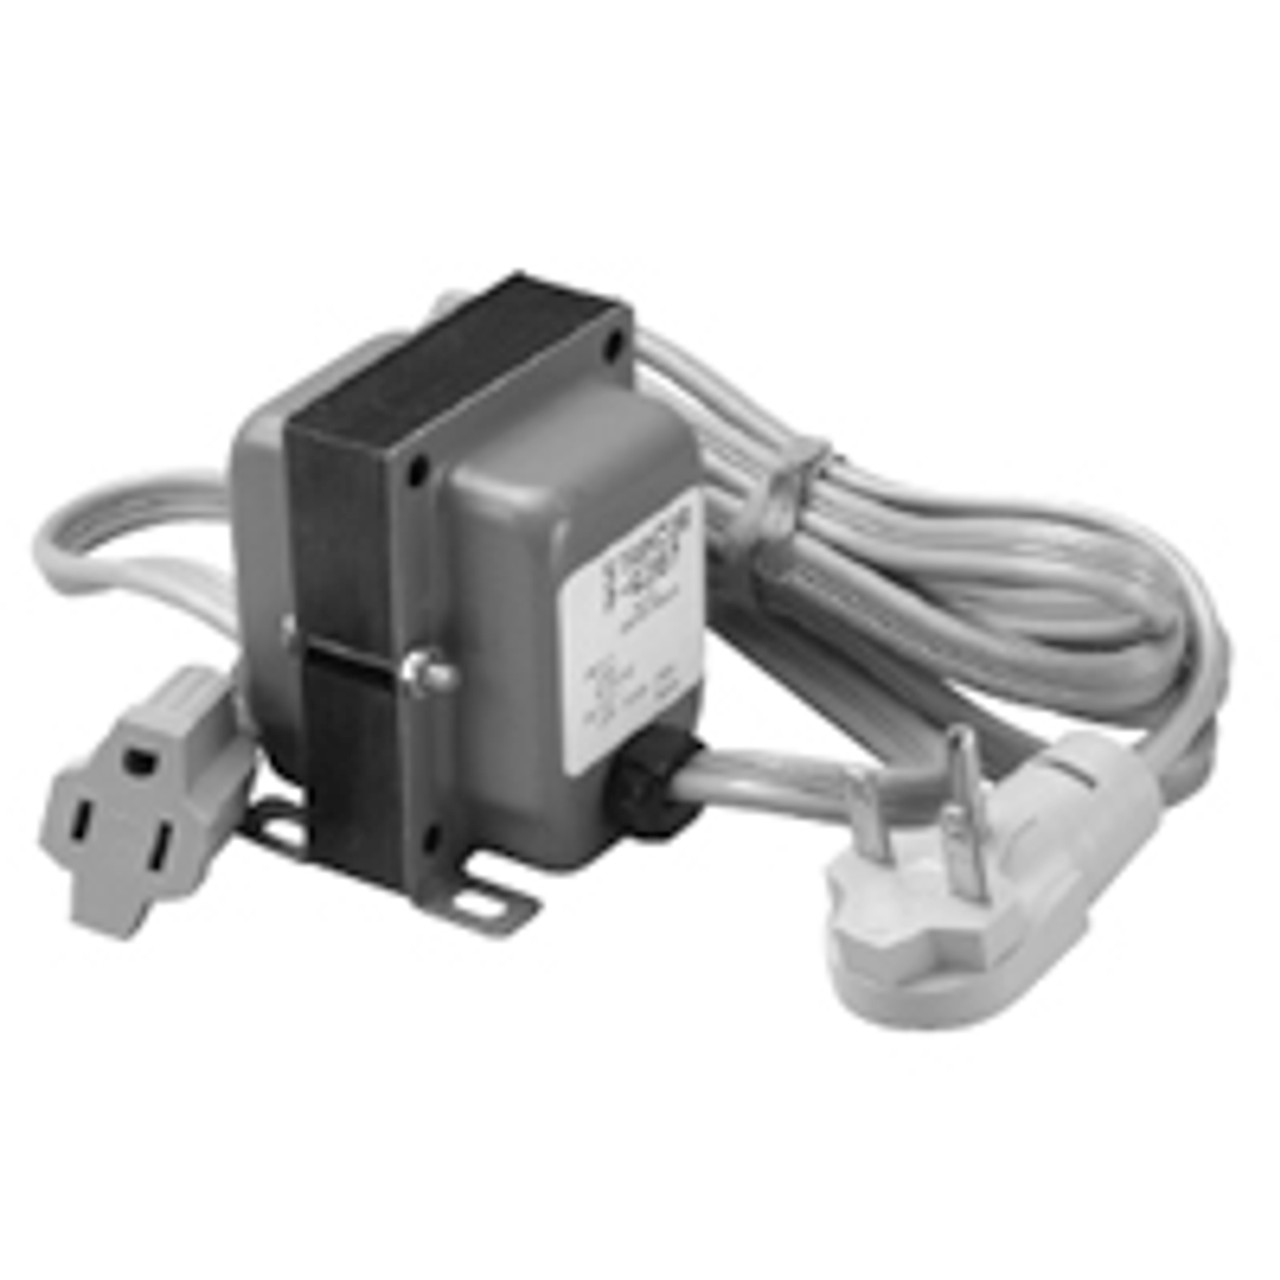 Stancor / White Rodgers GSD-150 Step-Down Transformers